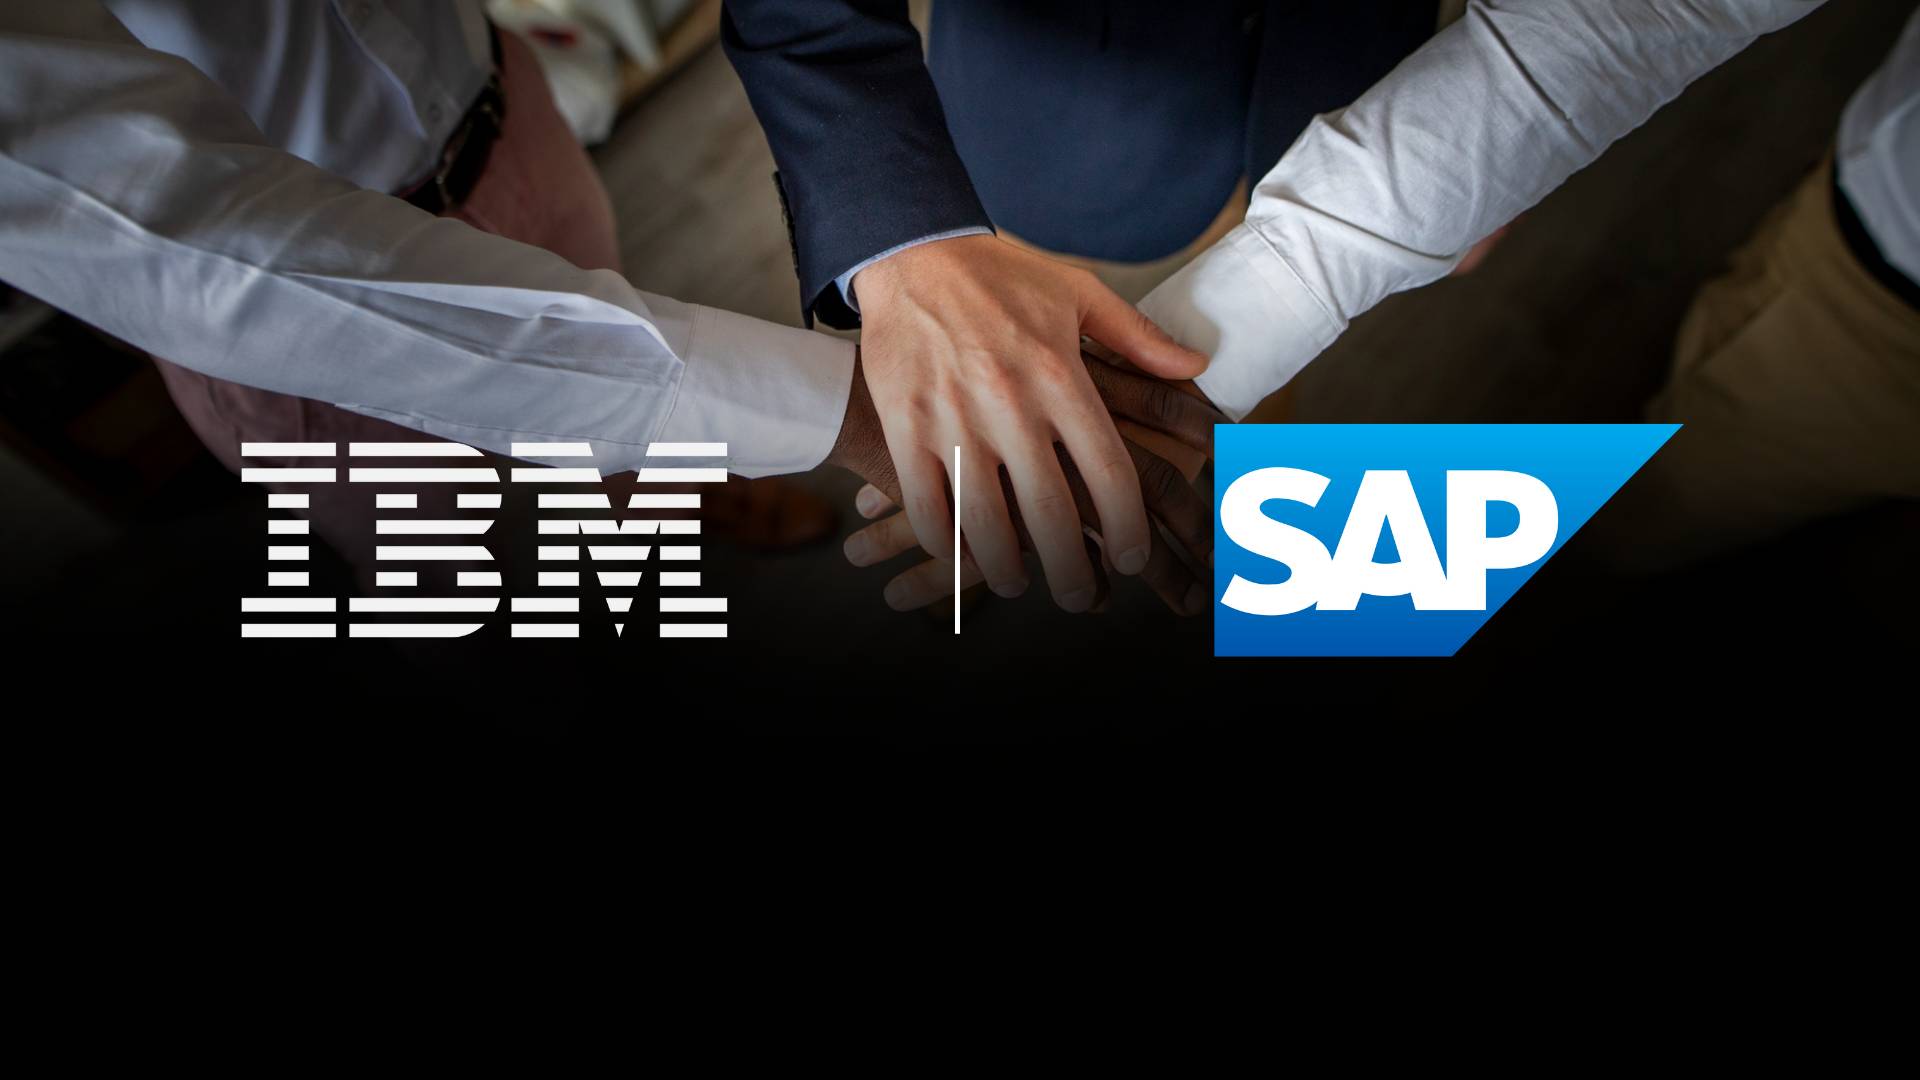 IBM and SAP Unveil Next-Generation Collaboration to Drive AI-Powered Business Transformation